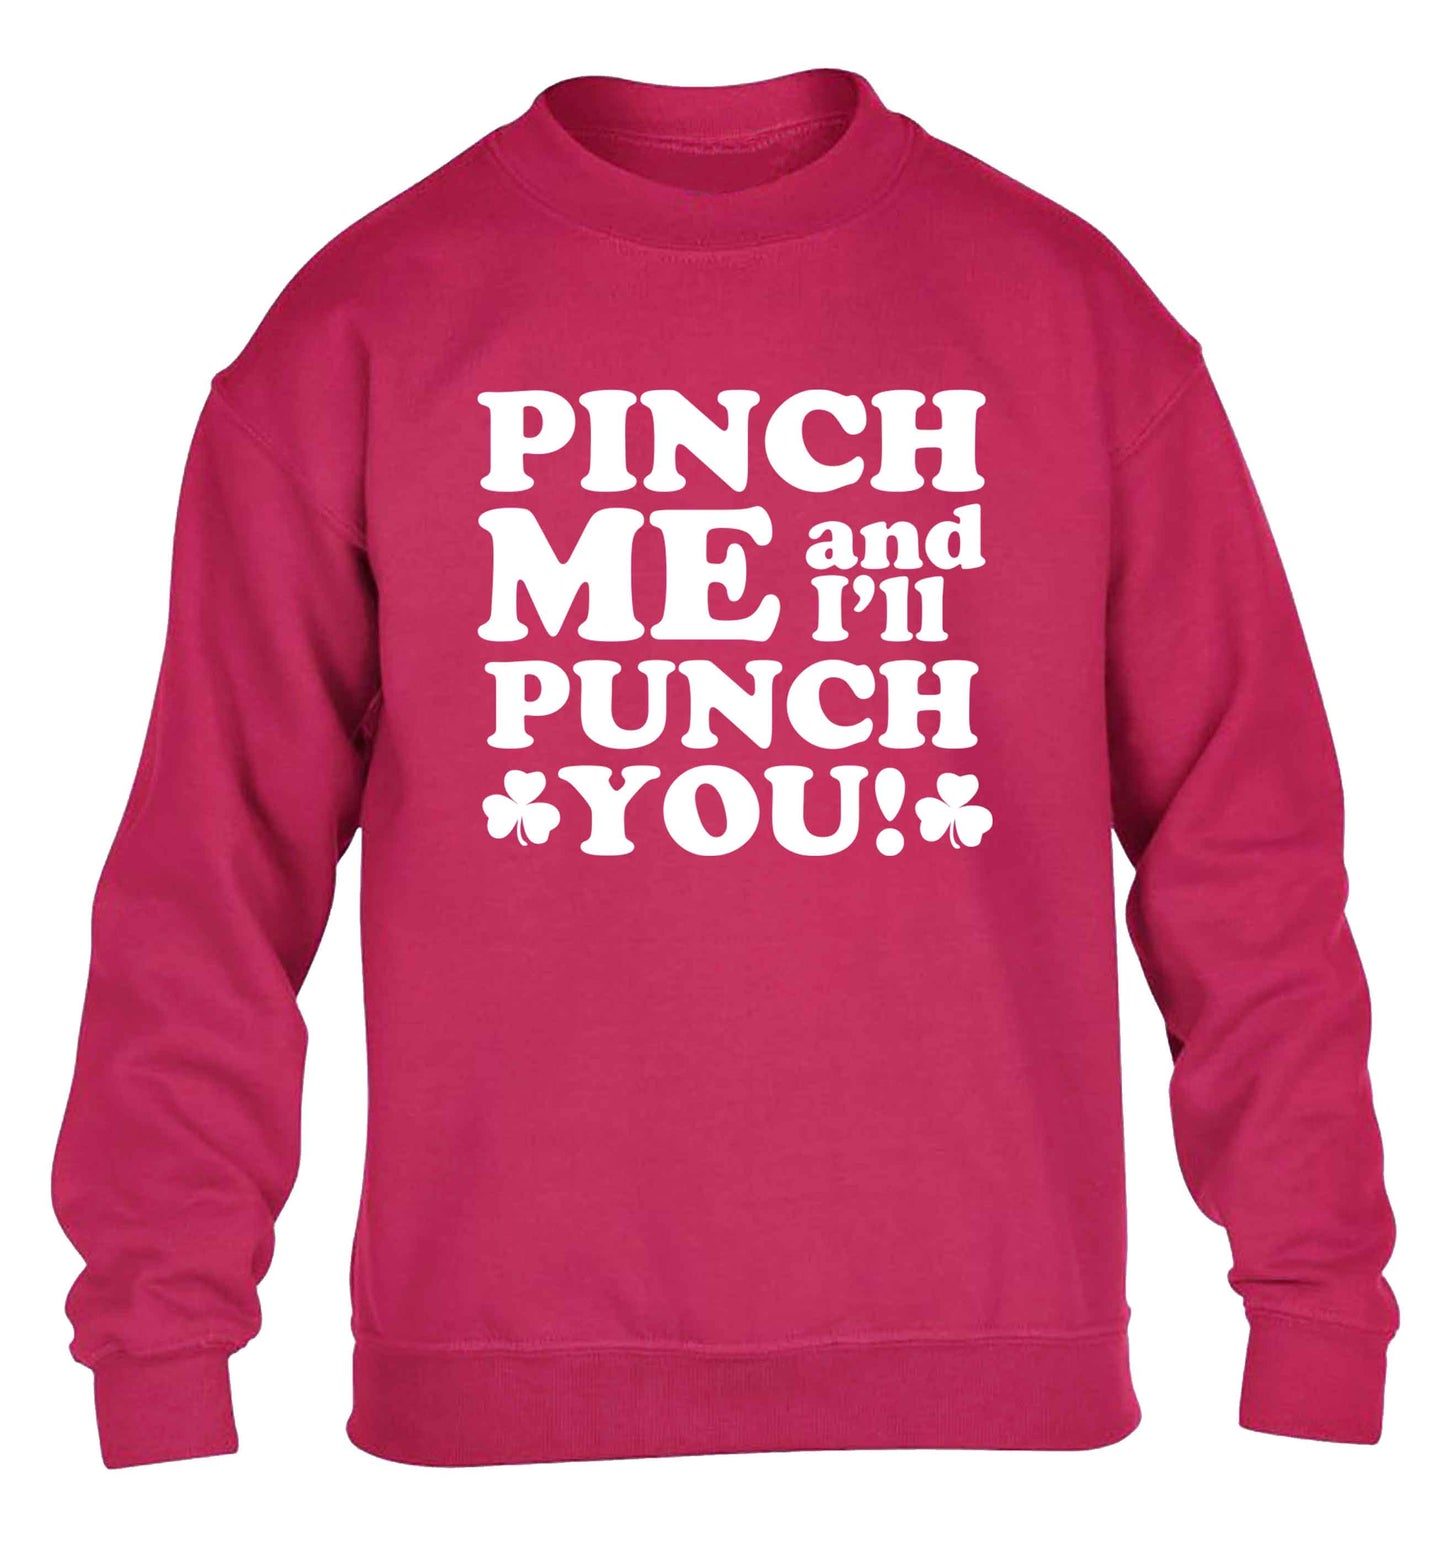 Pinch me and I'll punch you children's pink sweater 12-13 Years